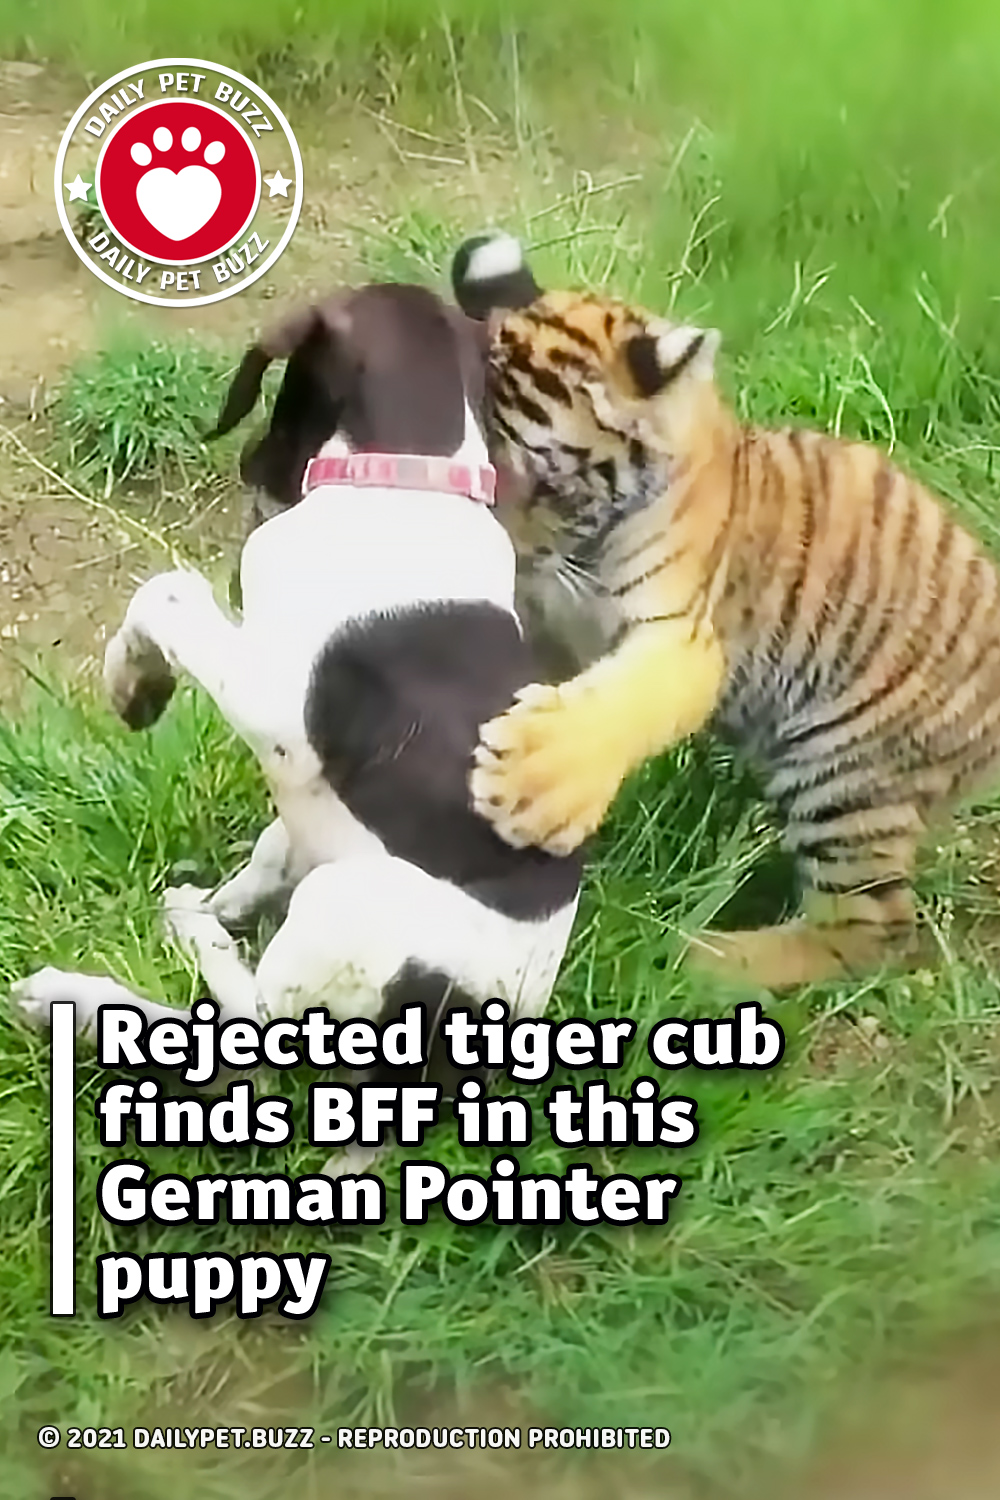 Rejected tiger cub finds BFF in this German Pointer puppy